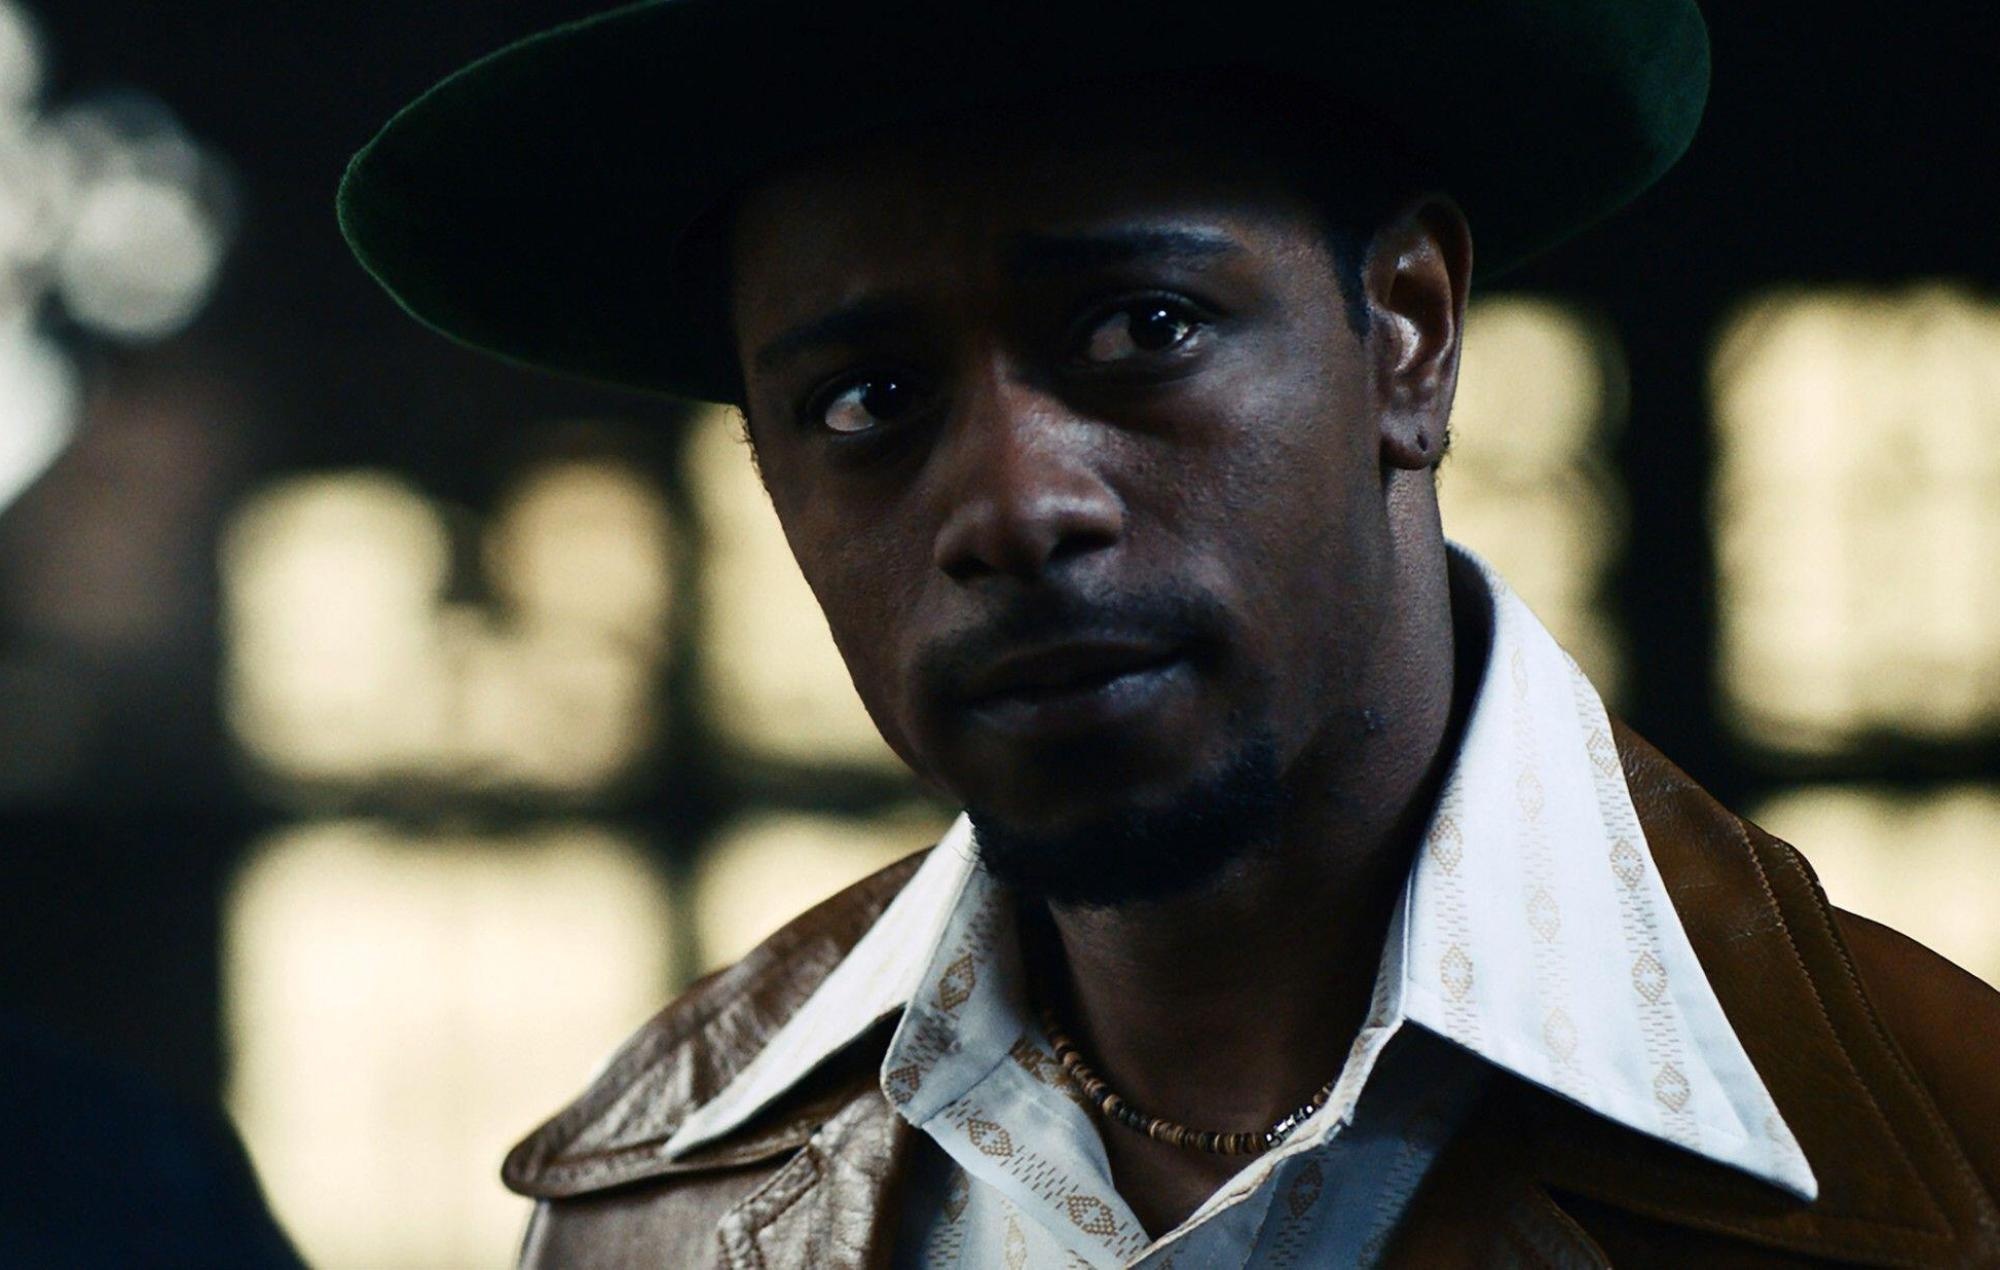 HD wallpaper, Role, Lakeith Stanfield, Judas And The Black Messiah, Panic Attacks, Desktop Hd Lakeith Stanfield Background Photo, 2000X1270 Hd Desktop